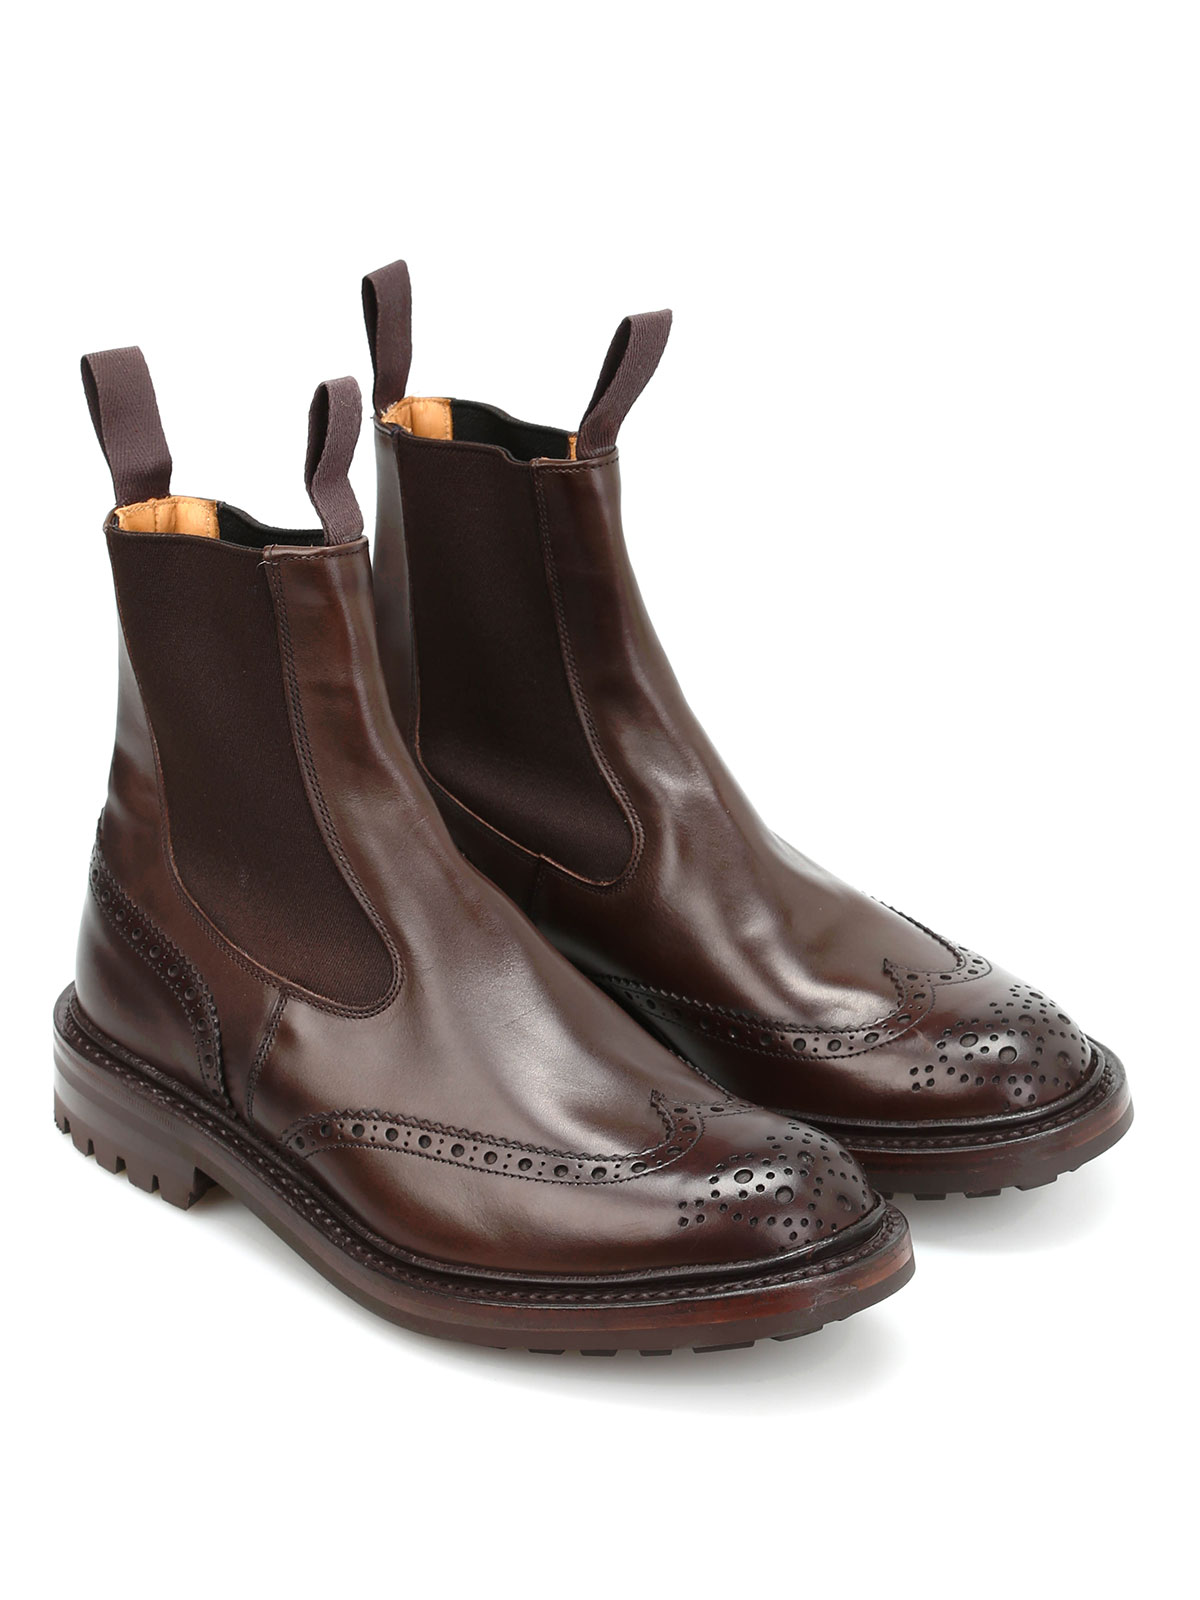 tricker boots for sale